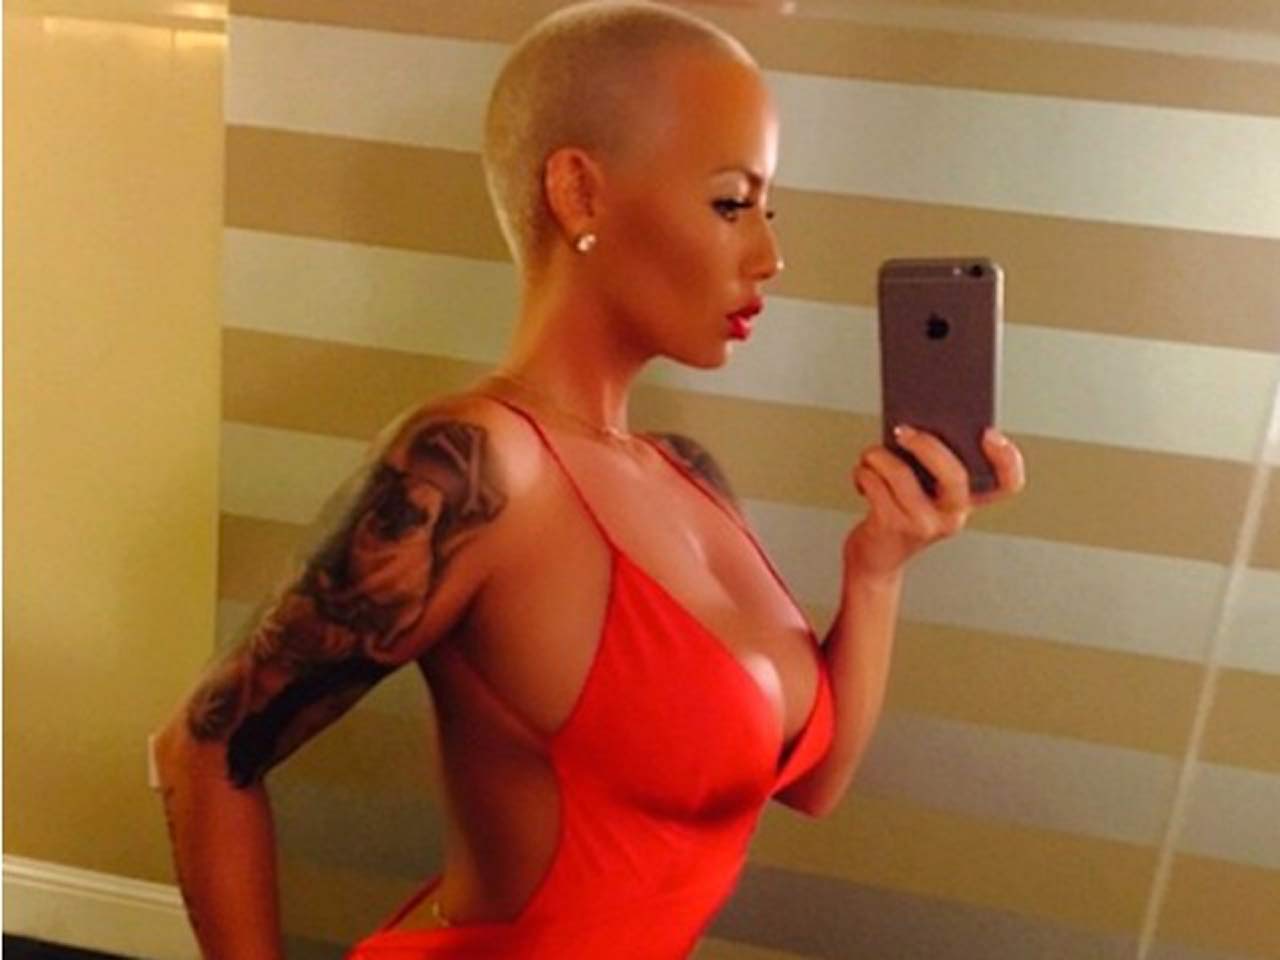 Amber rose onlyfans worth it